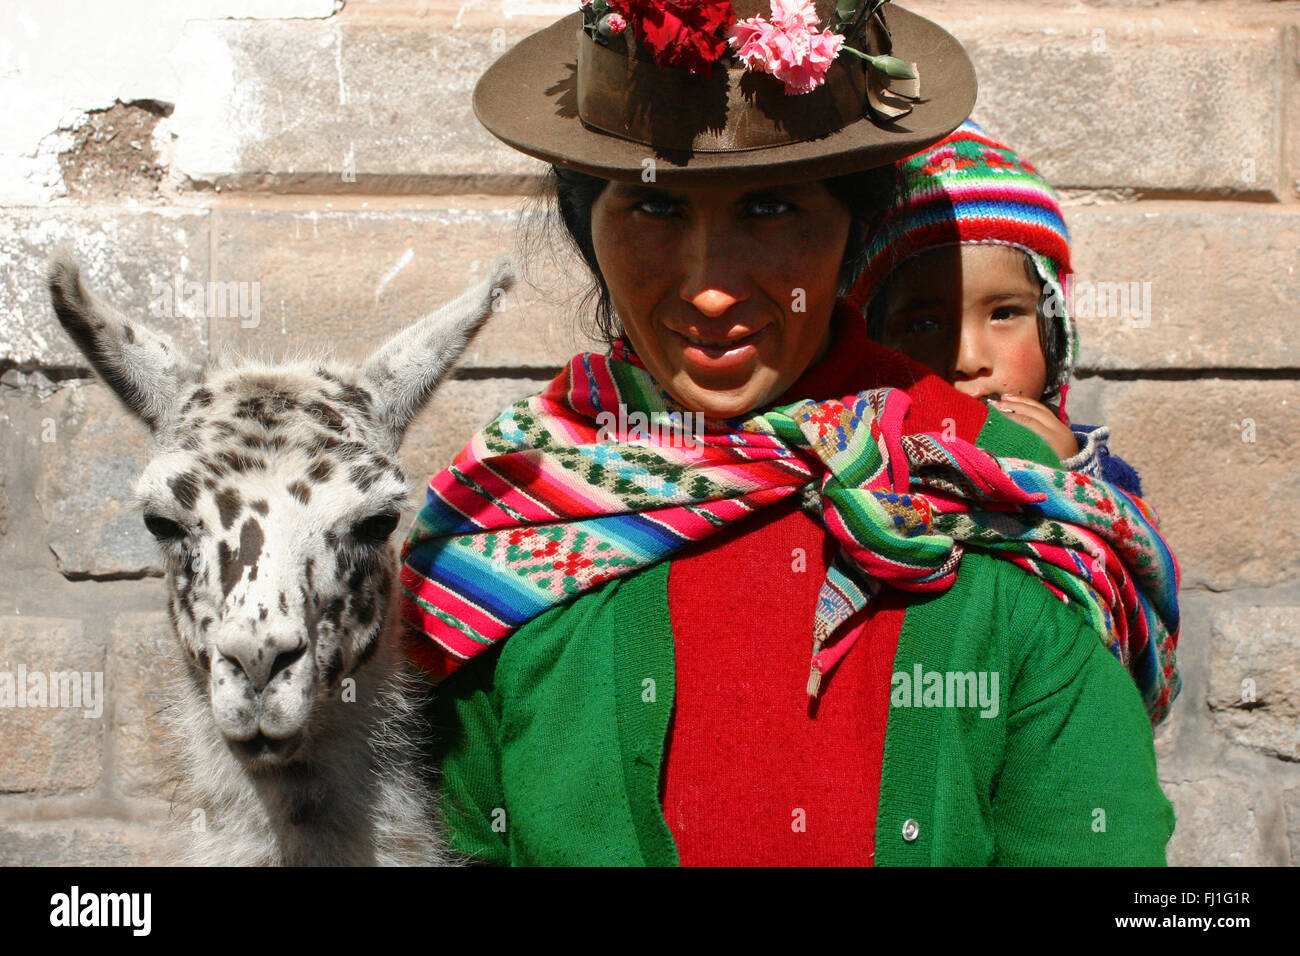 Portrait of Peruvian woman with traditional outfit and bowler hat , Peru Stock Photo